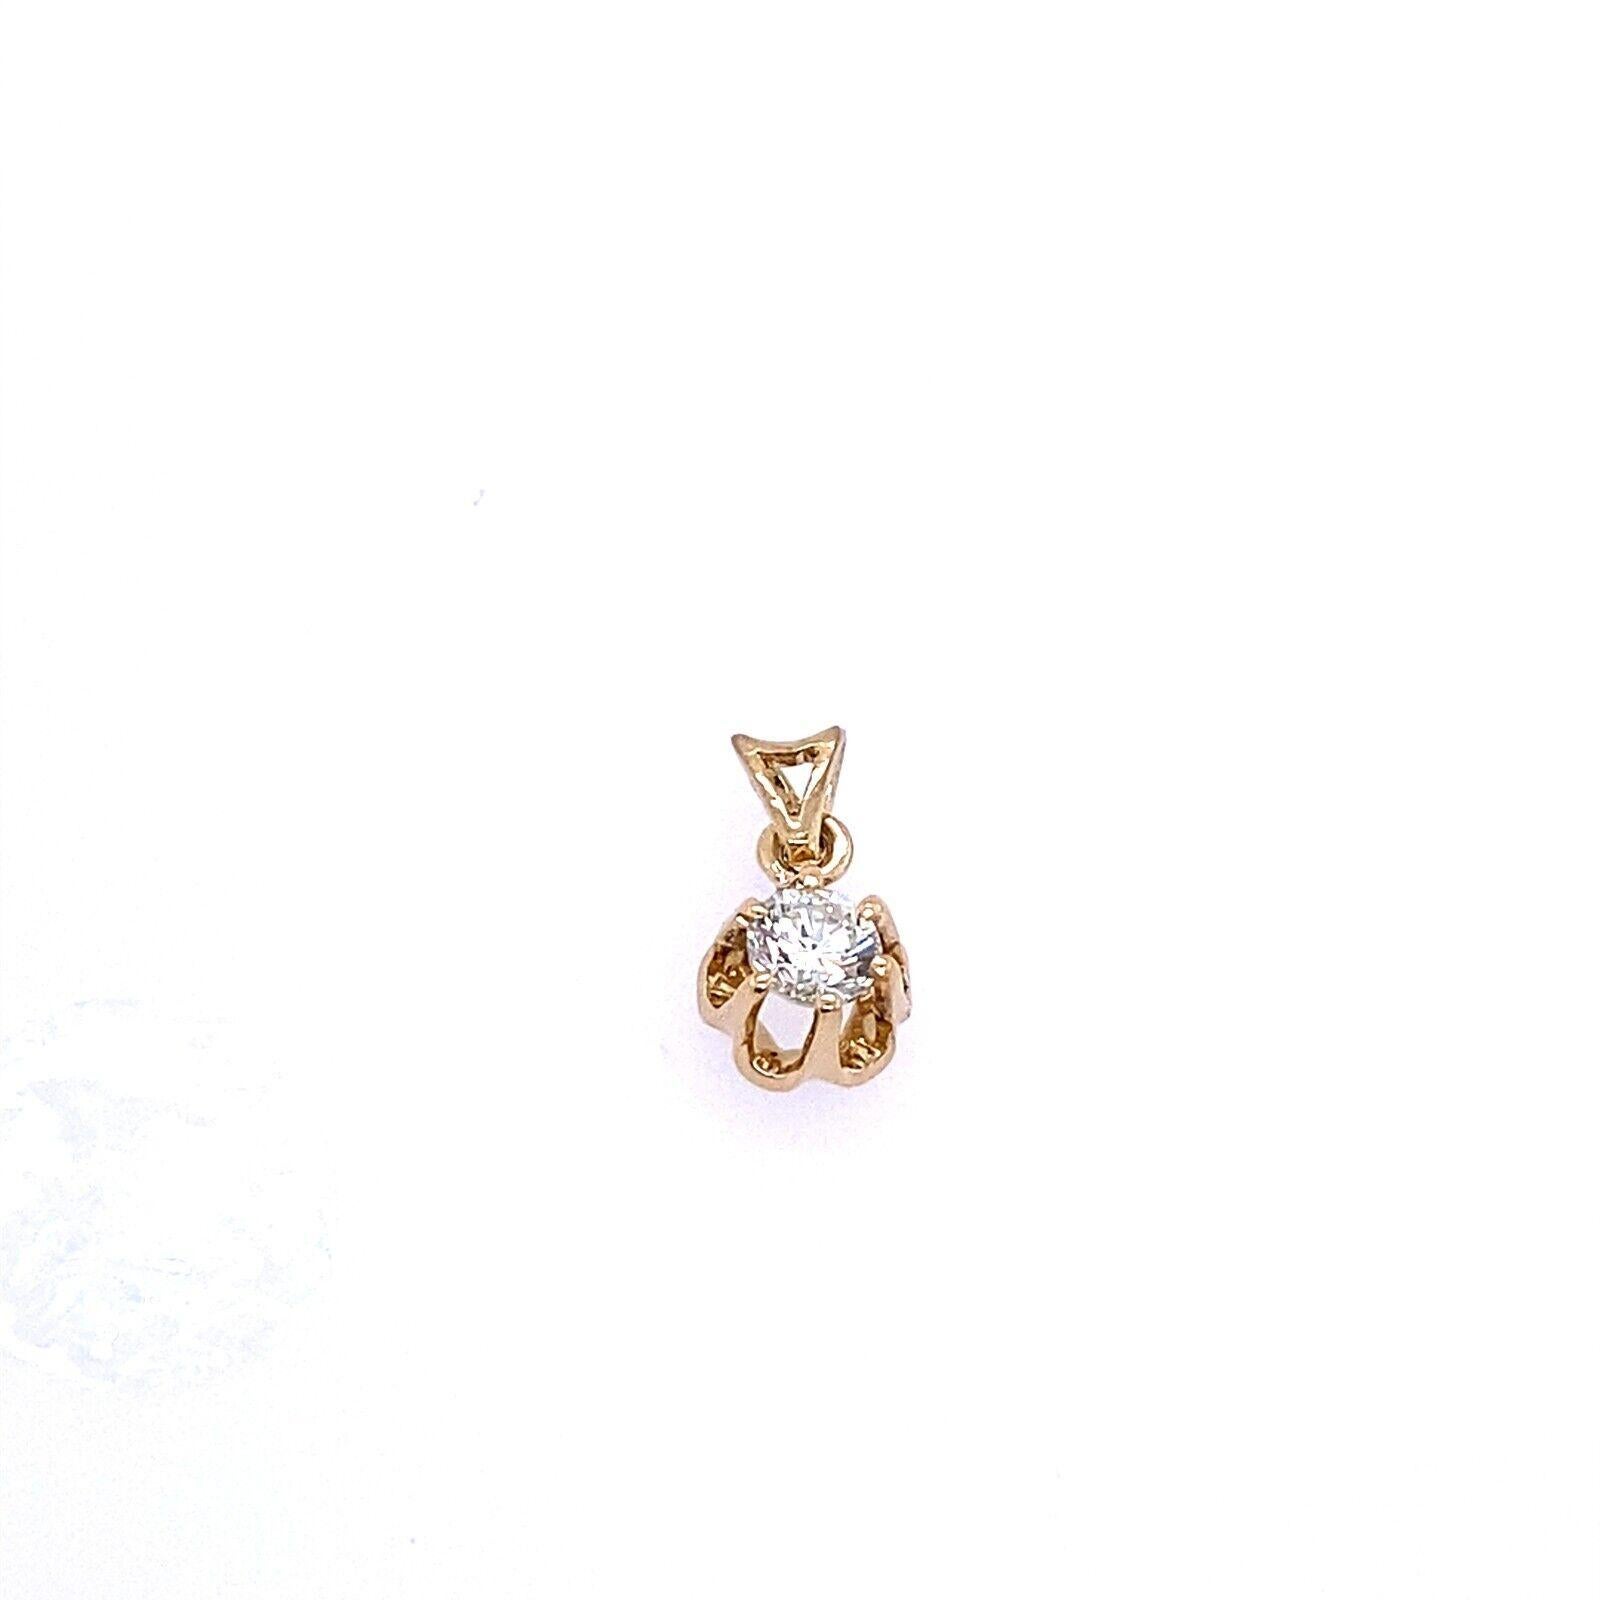 This delicate 18ct yellow gold pendant features a 0.25ct J/K VS diamond,  can be worn with a 16-inch or 18-inch 18ct yellow gold chain.This pendant is a perfect gift for your loved ones and yourself.

Additional Information: 
Total Diamond Weight: